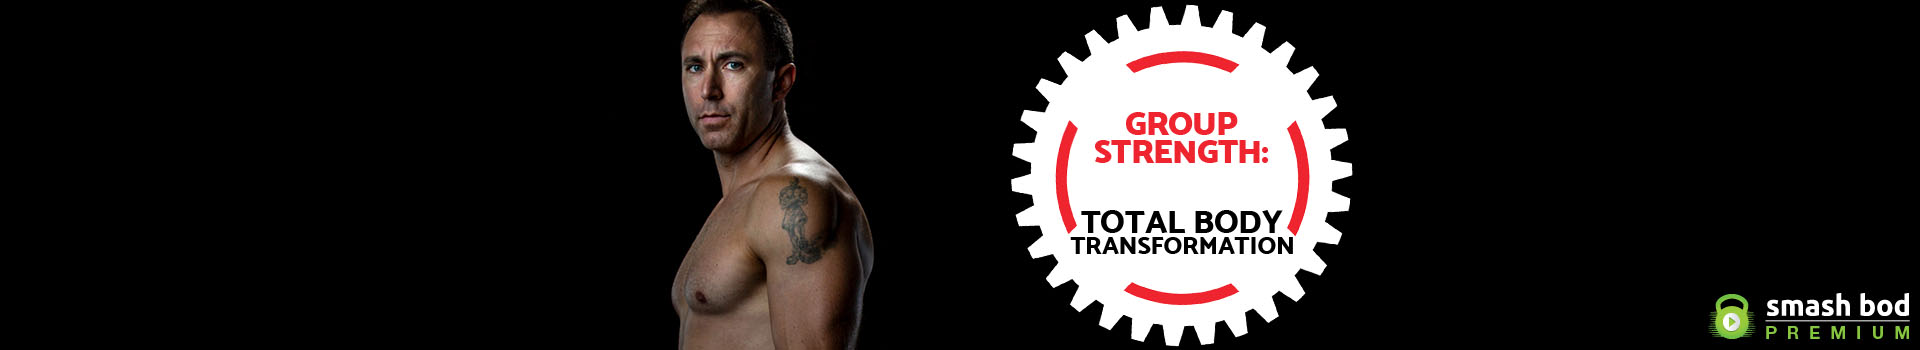 Group Strength: Total Body Transformation